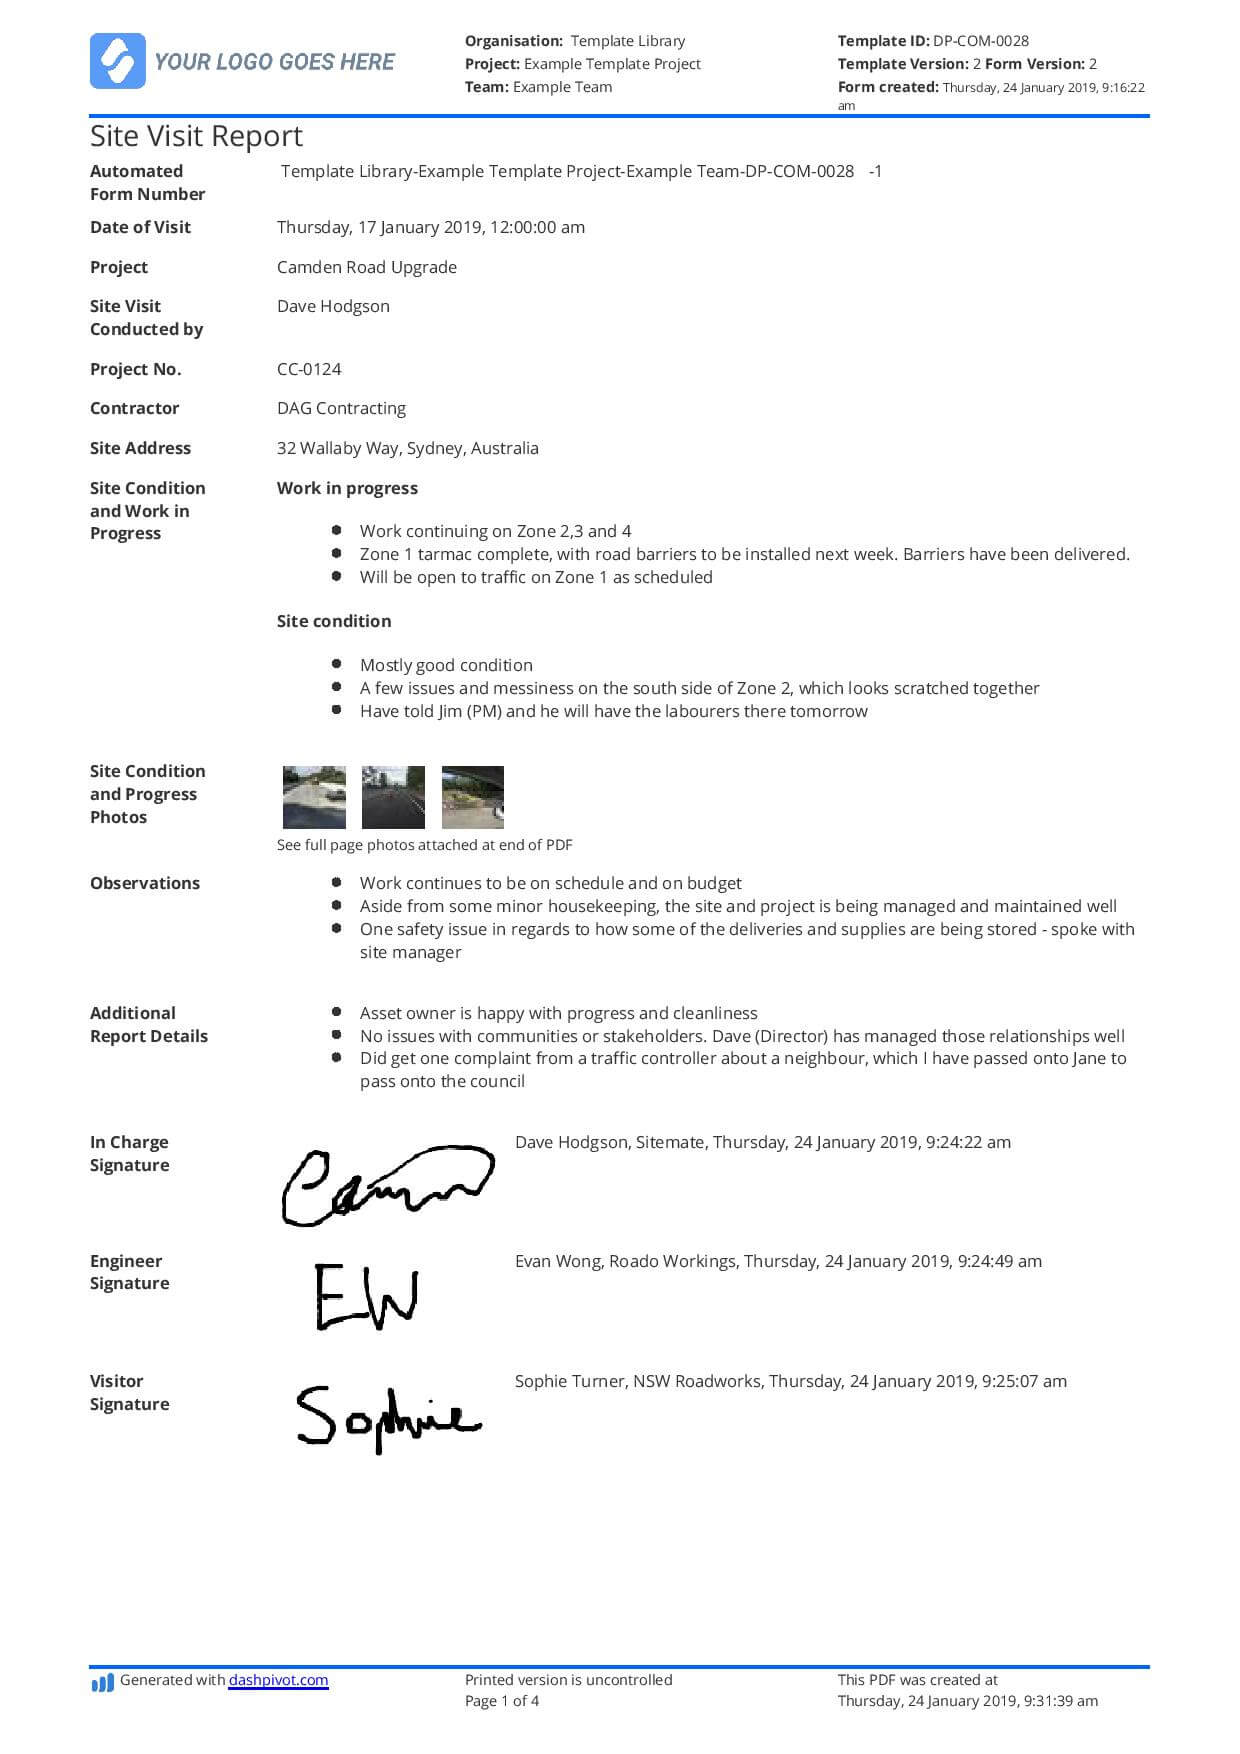 Construction Site Visit Report Template And Sample [Free To Use] Intended For Customer Visit Report Format Templates